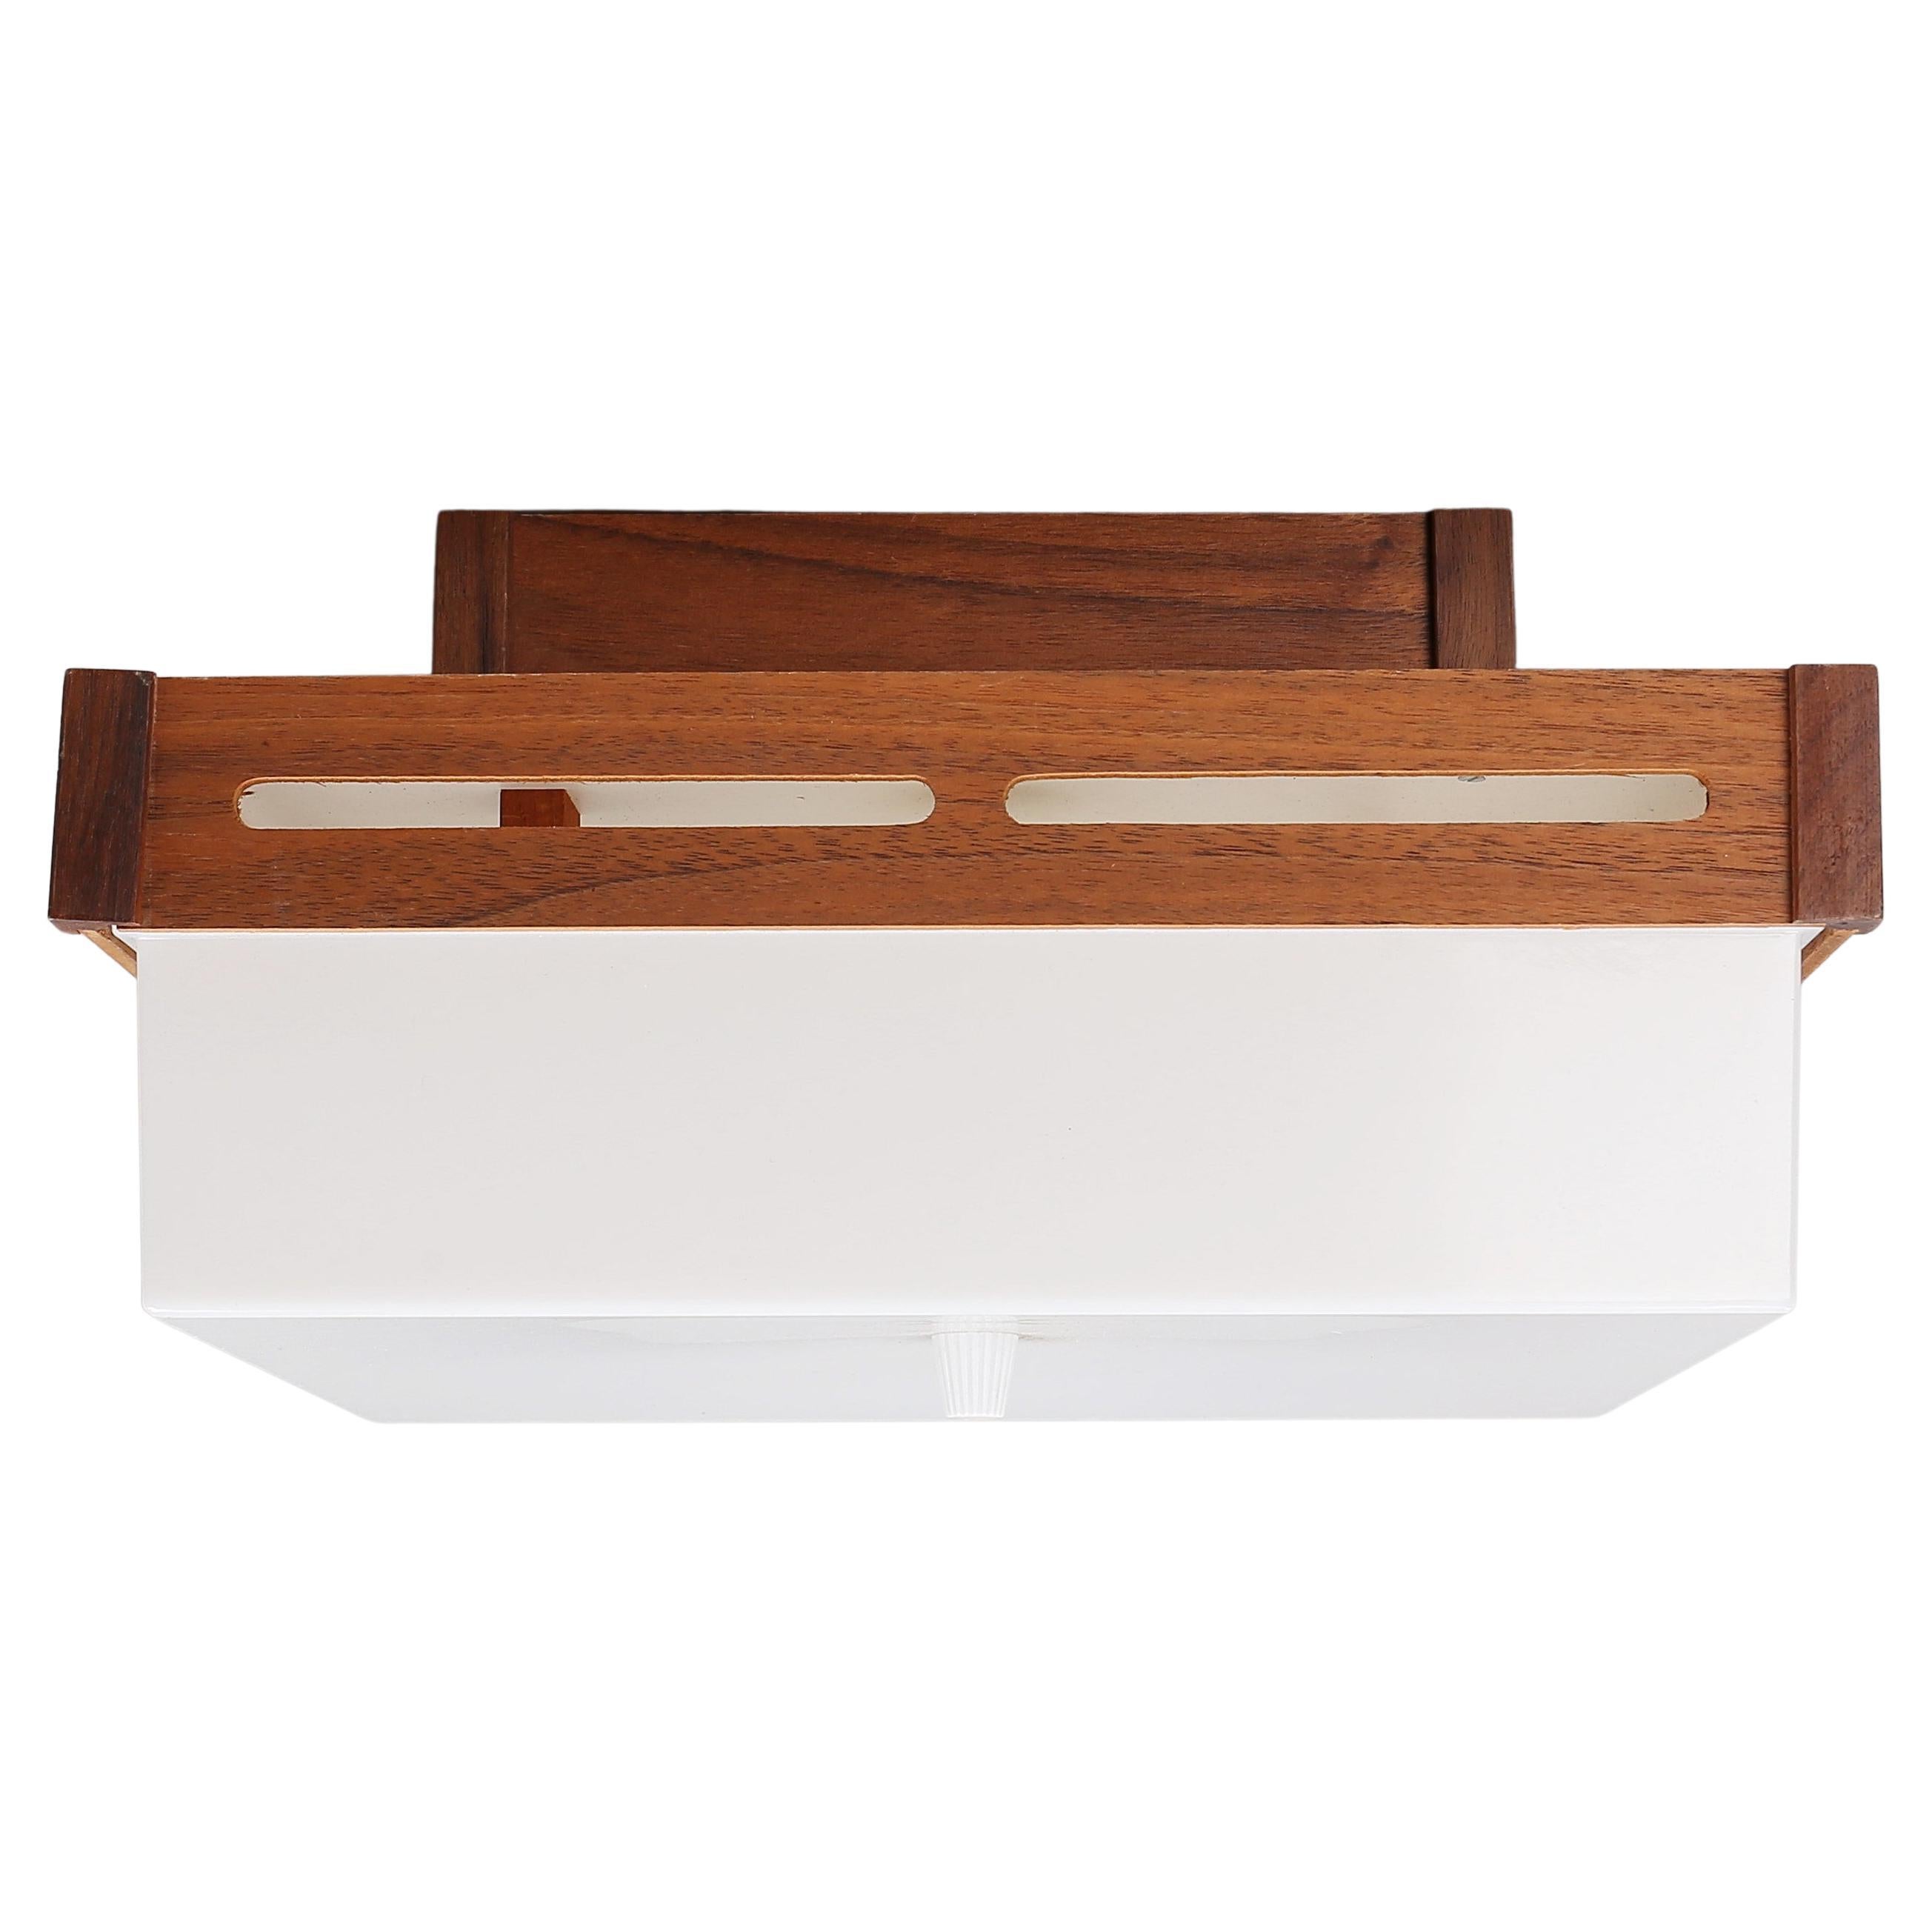 A Teak ceiling lamp Anonymous made in Sweden around 1960s.
White acrylic shade mounted on a teak base with nice details.
Normal wear and tear.